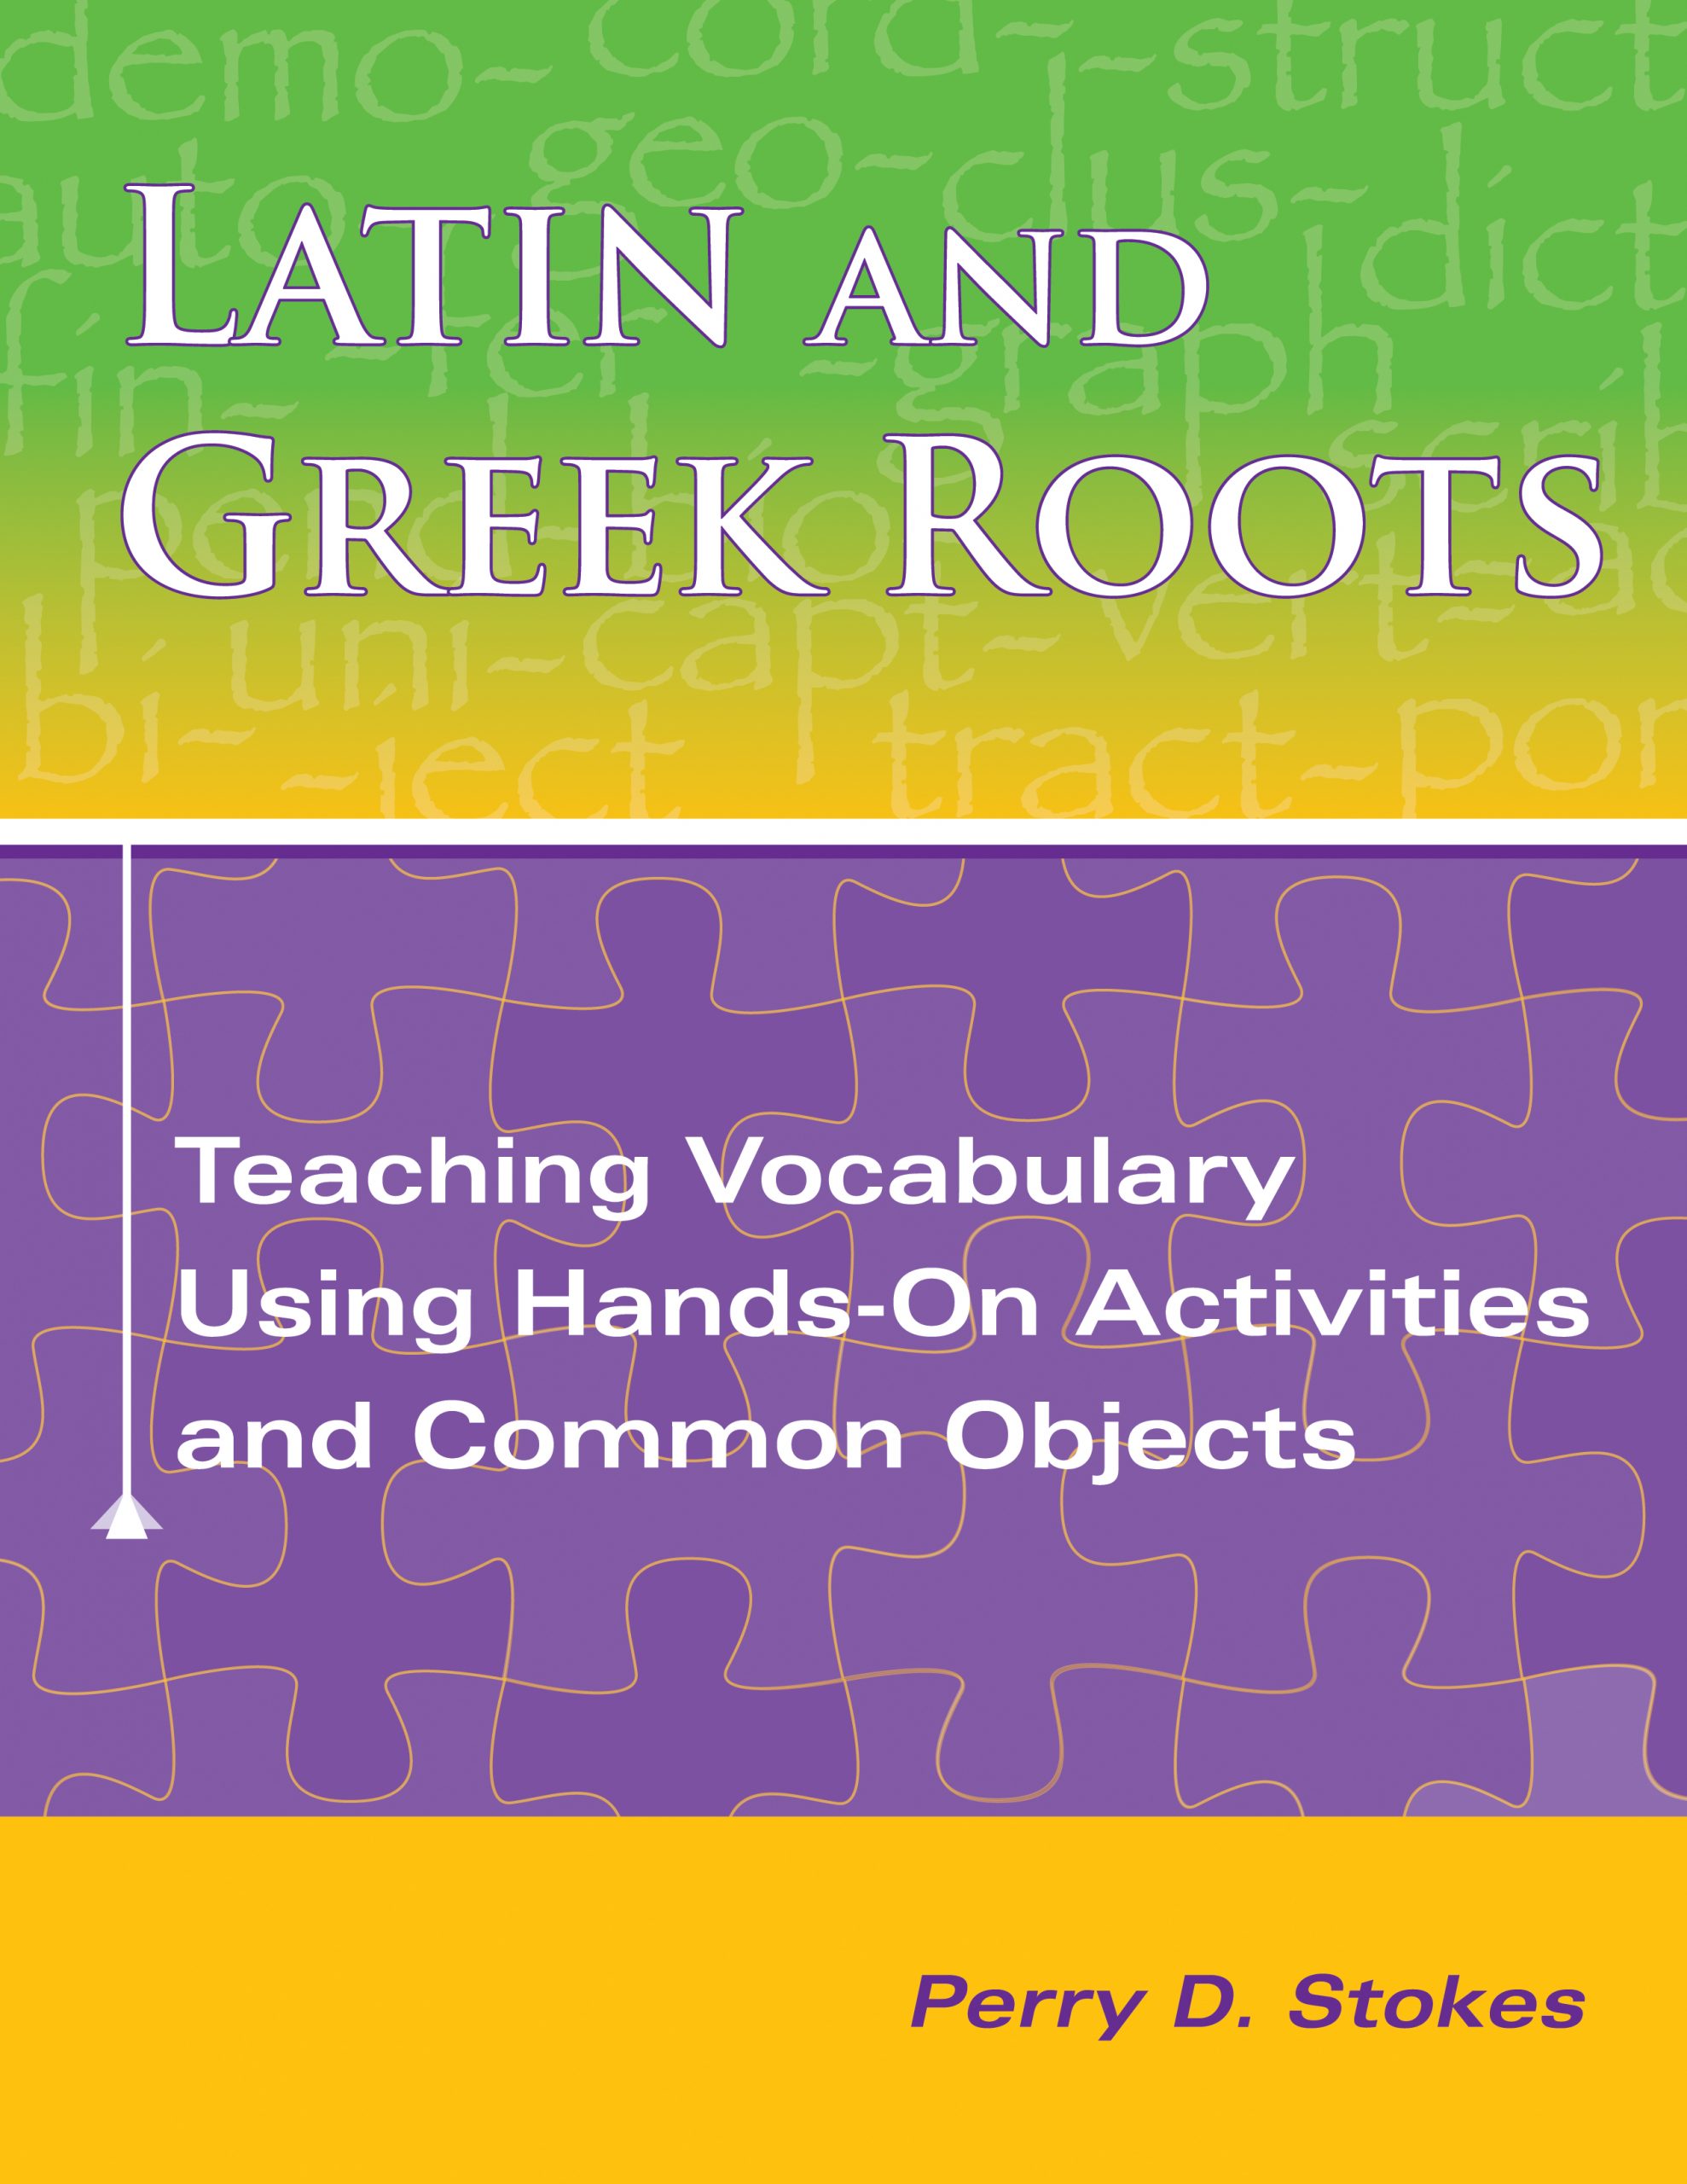 Latin and Greek Roots: Teaching Vocabulary Using Hands-On Activities and Common Objects